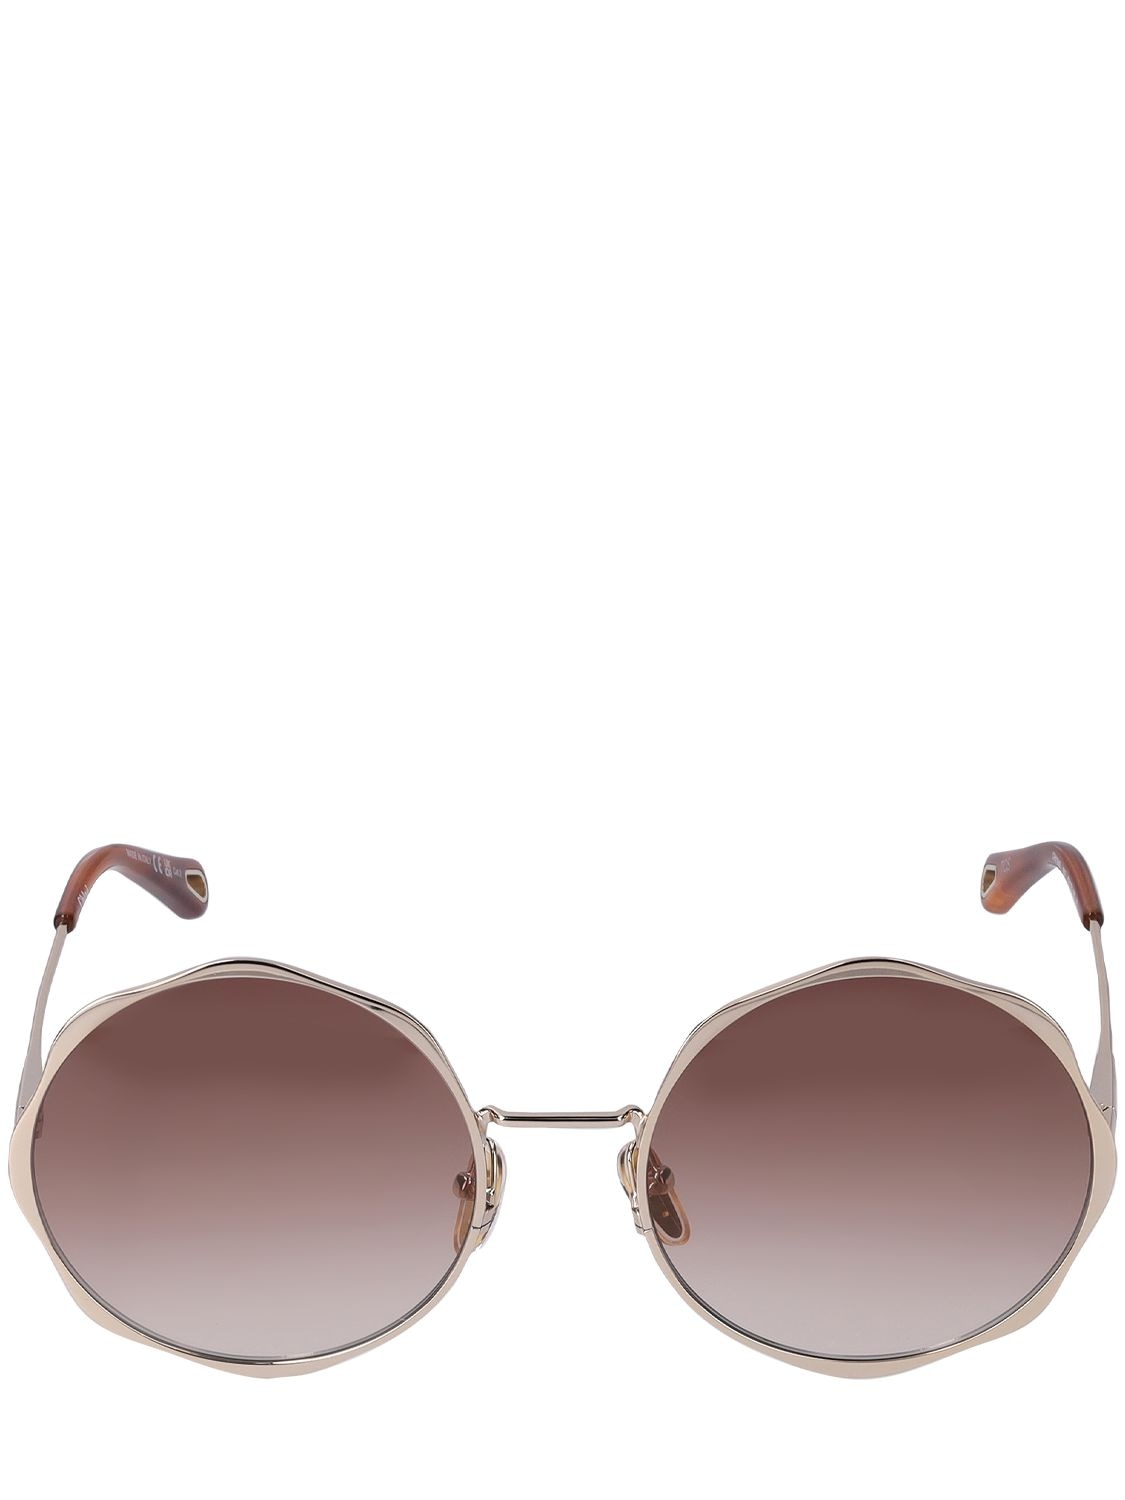 Chloé Scallop Line Round Metal Sunglasses In Gold,brown